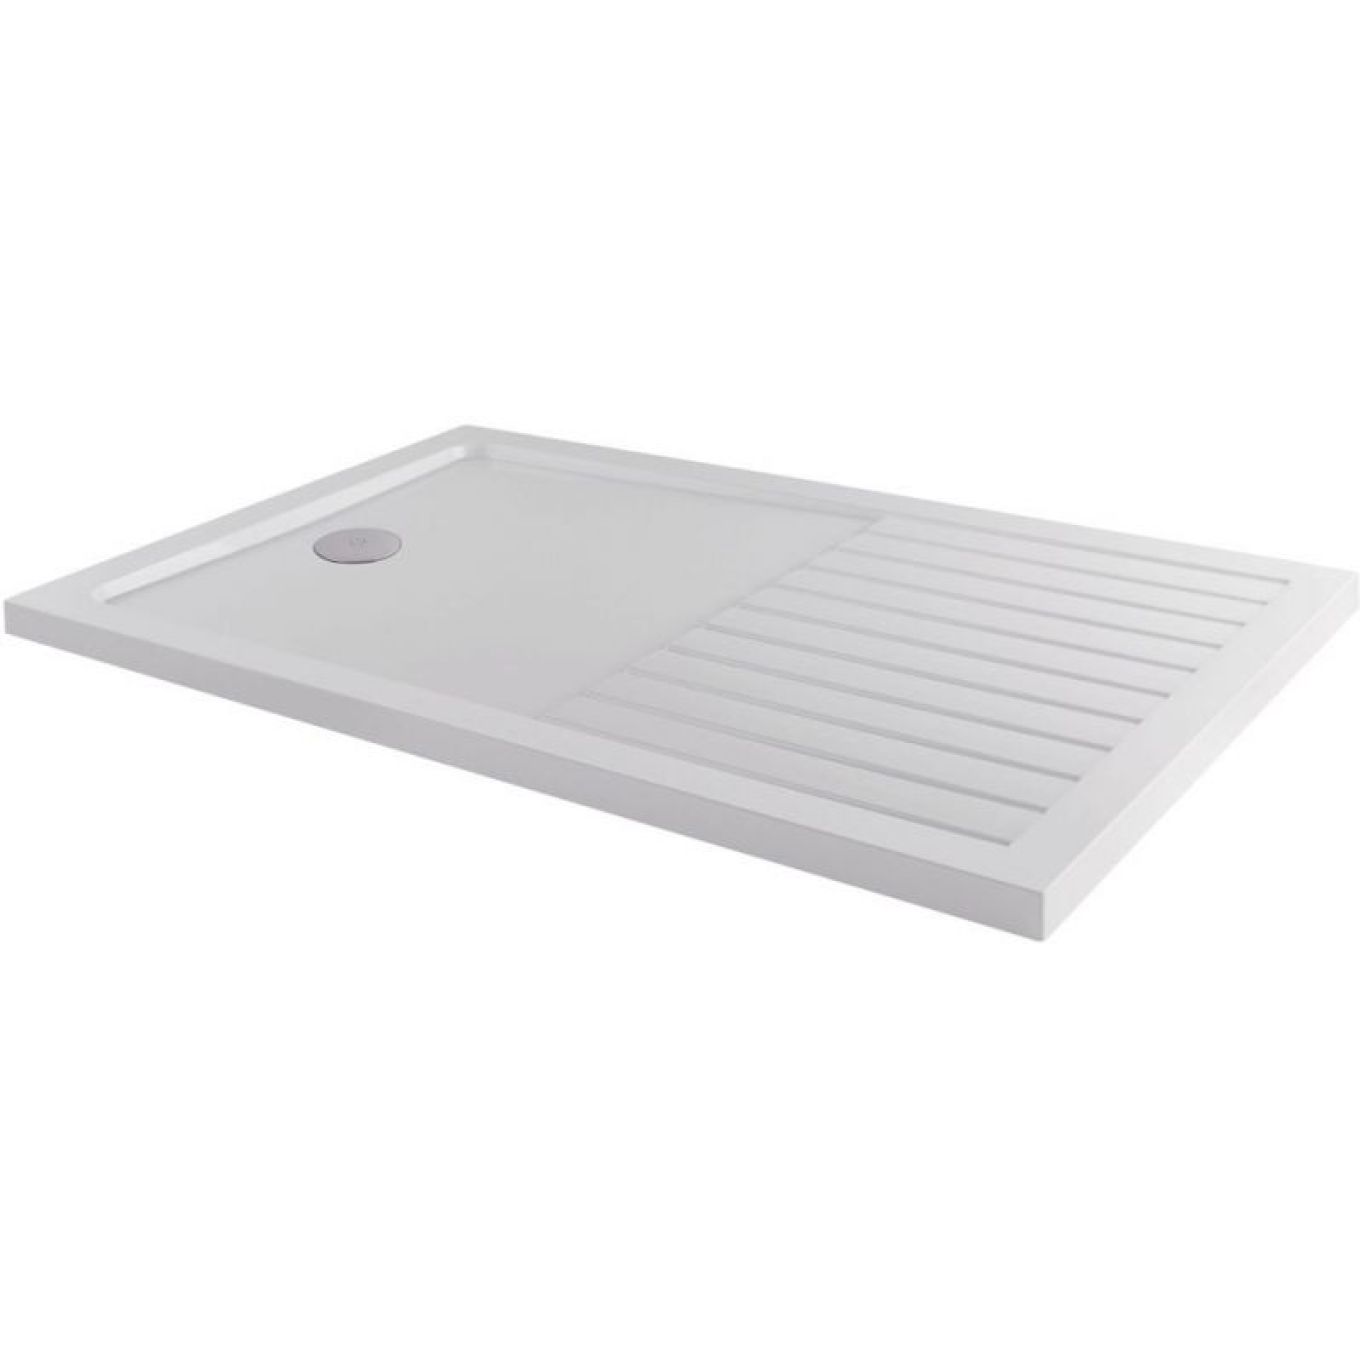 Low Profile Shower Tray with Drying Area – 1700 x 800 x 135mm